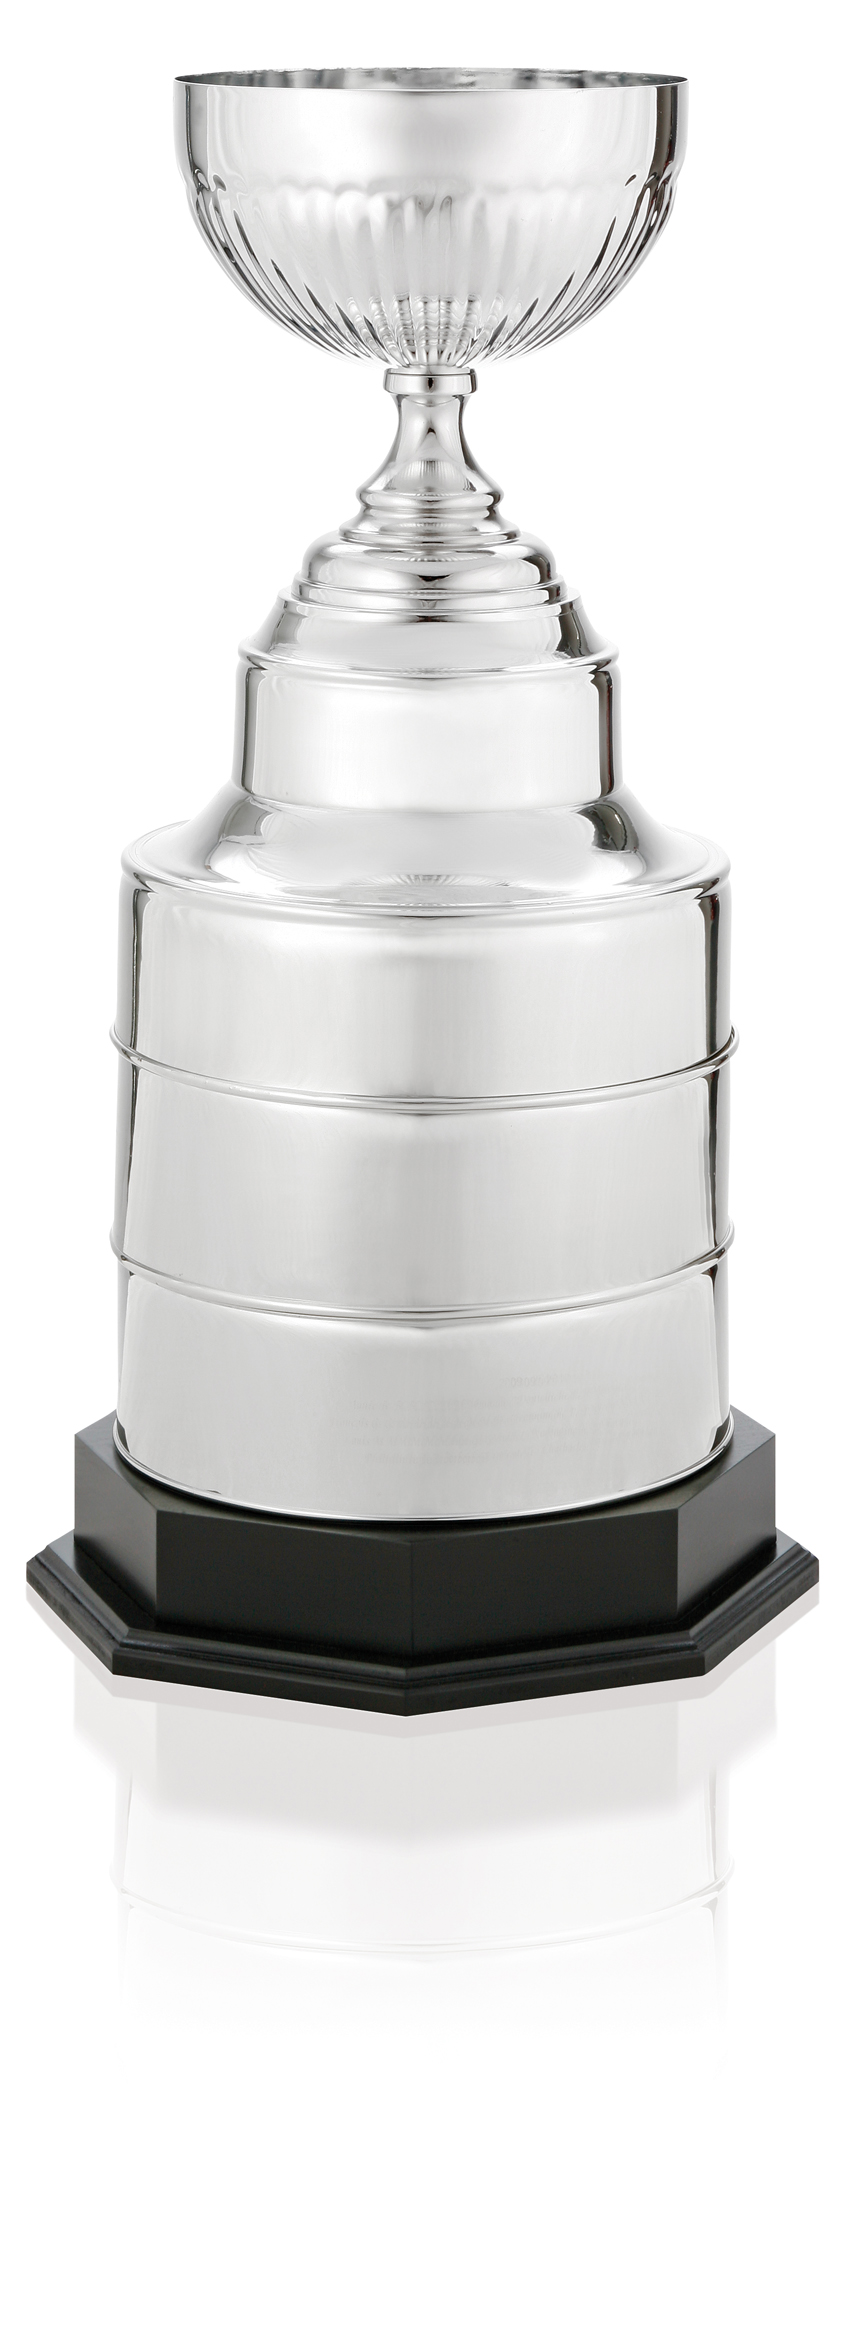 stanley cup clip art free - photo #45